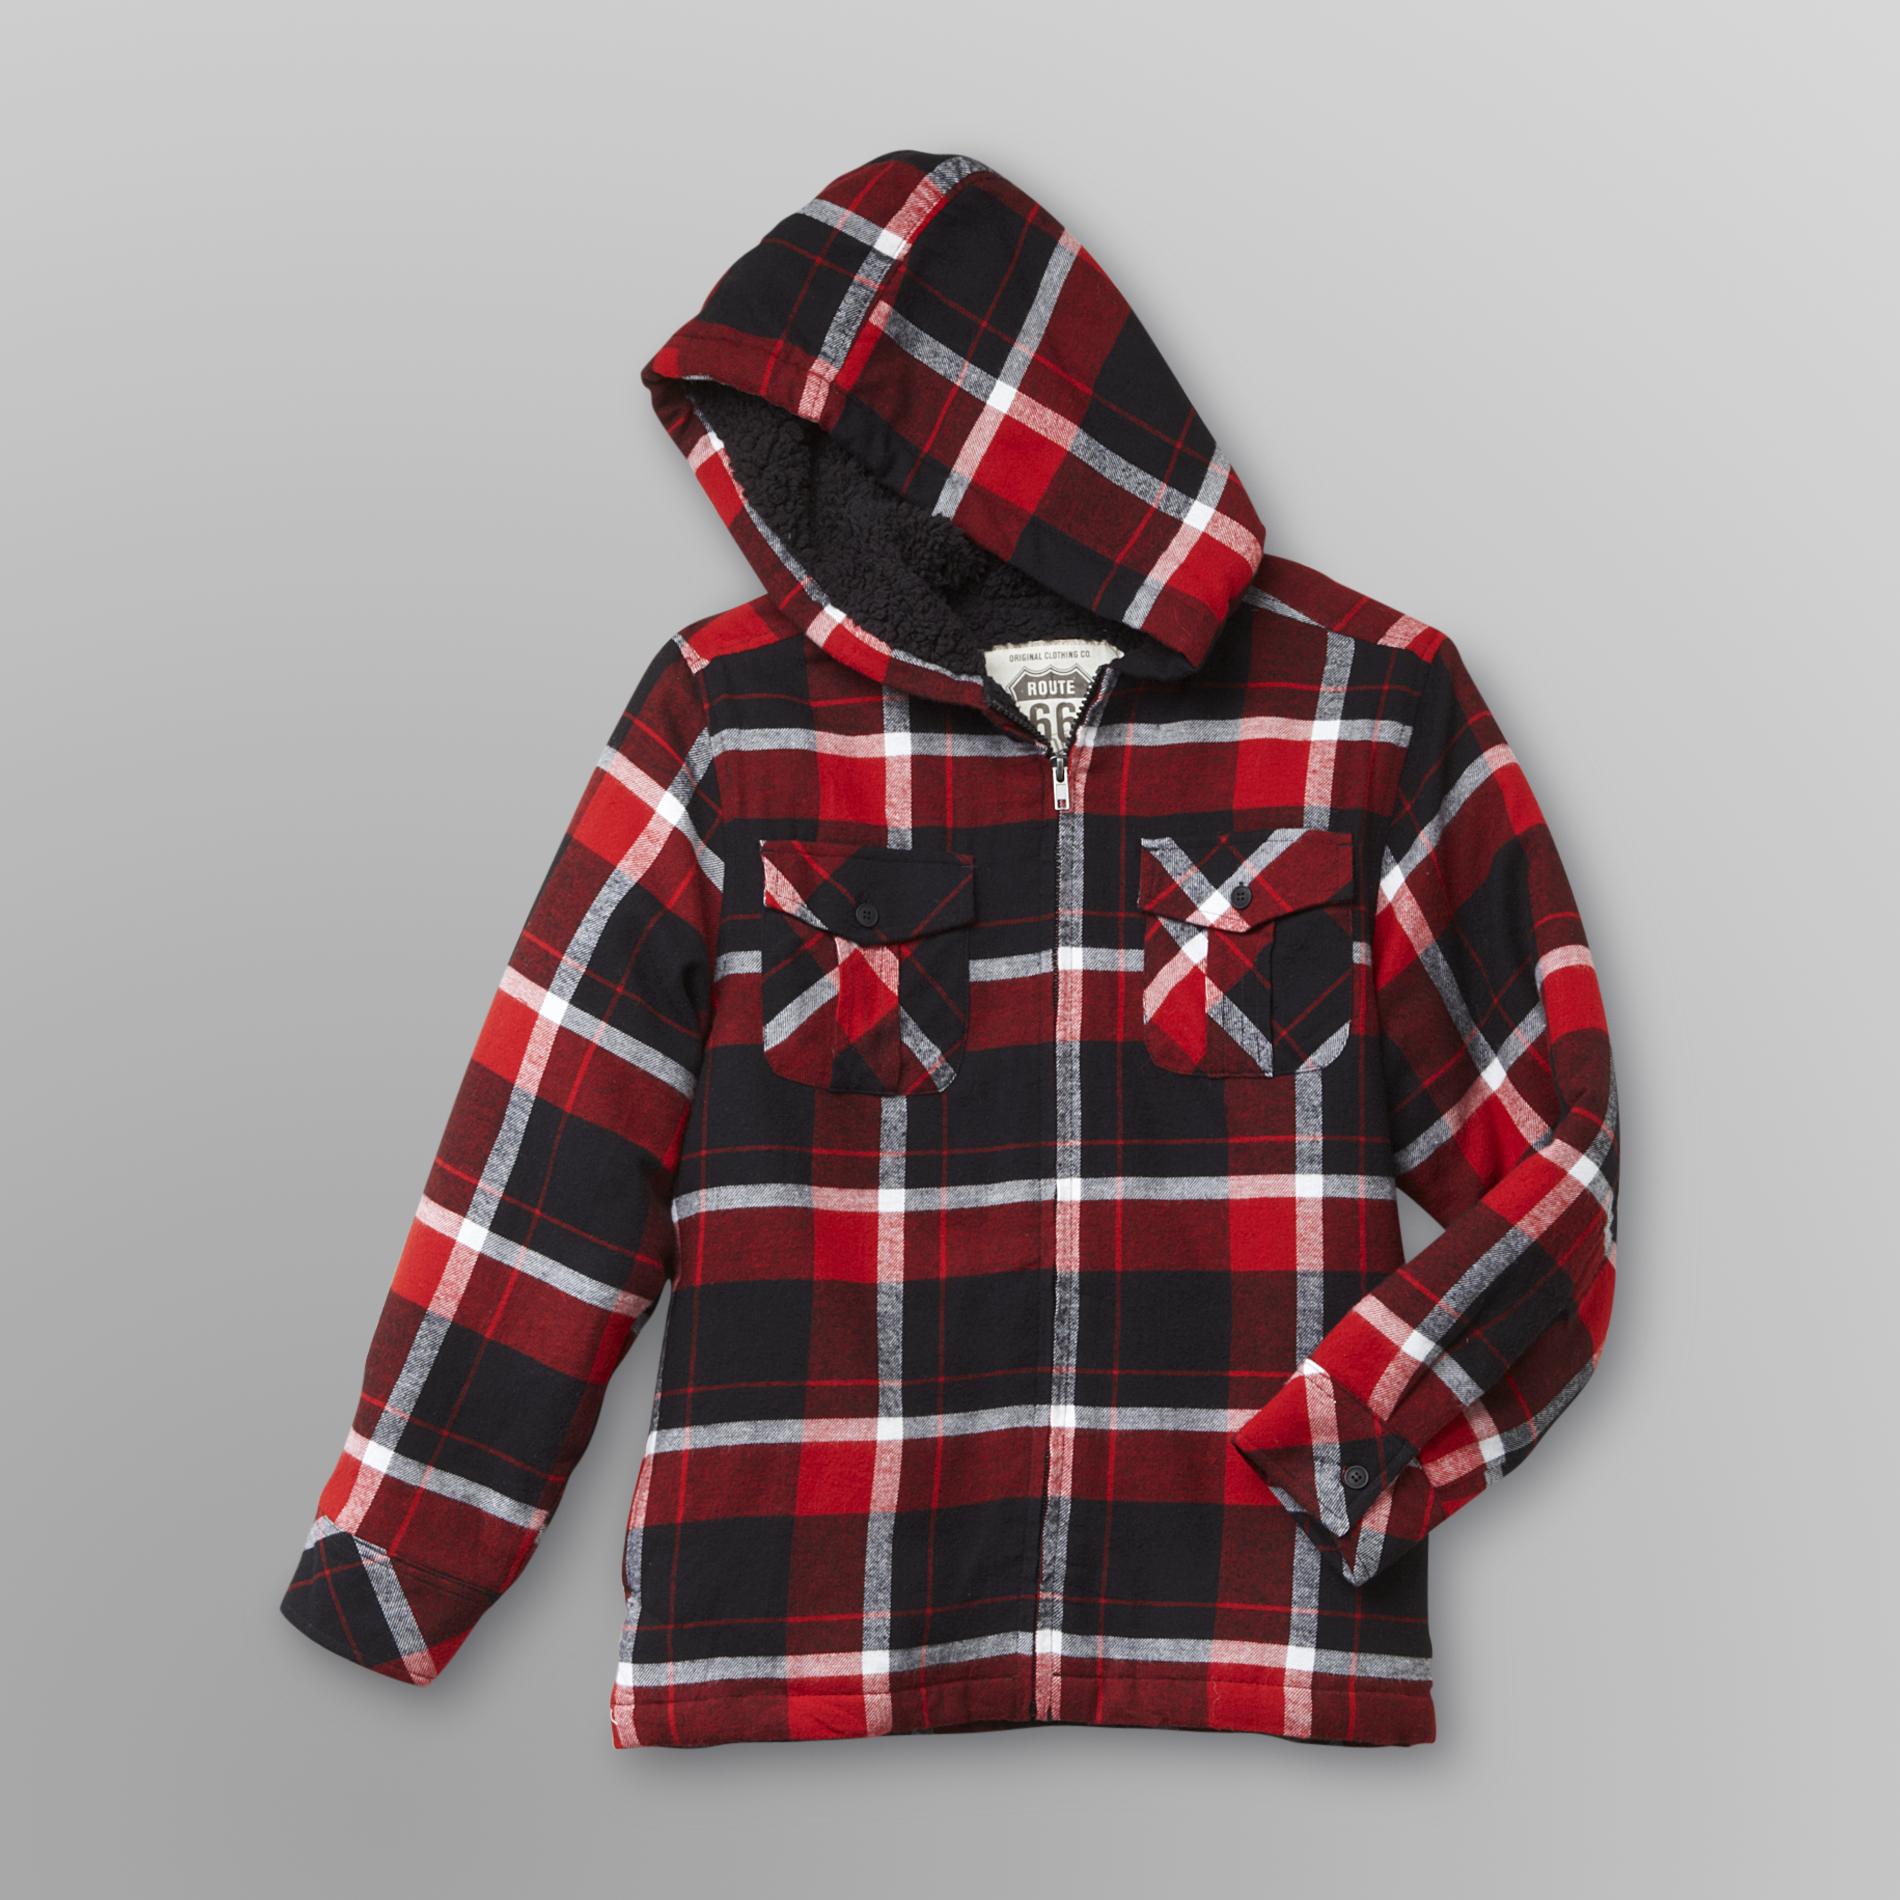 Route 66 Boy's Hooded Flannel Jacket - Plaid